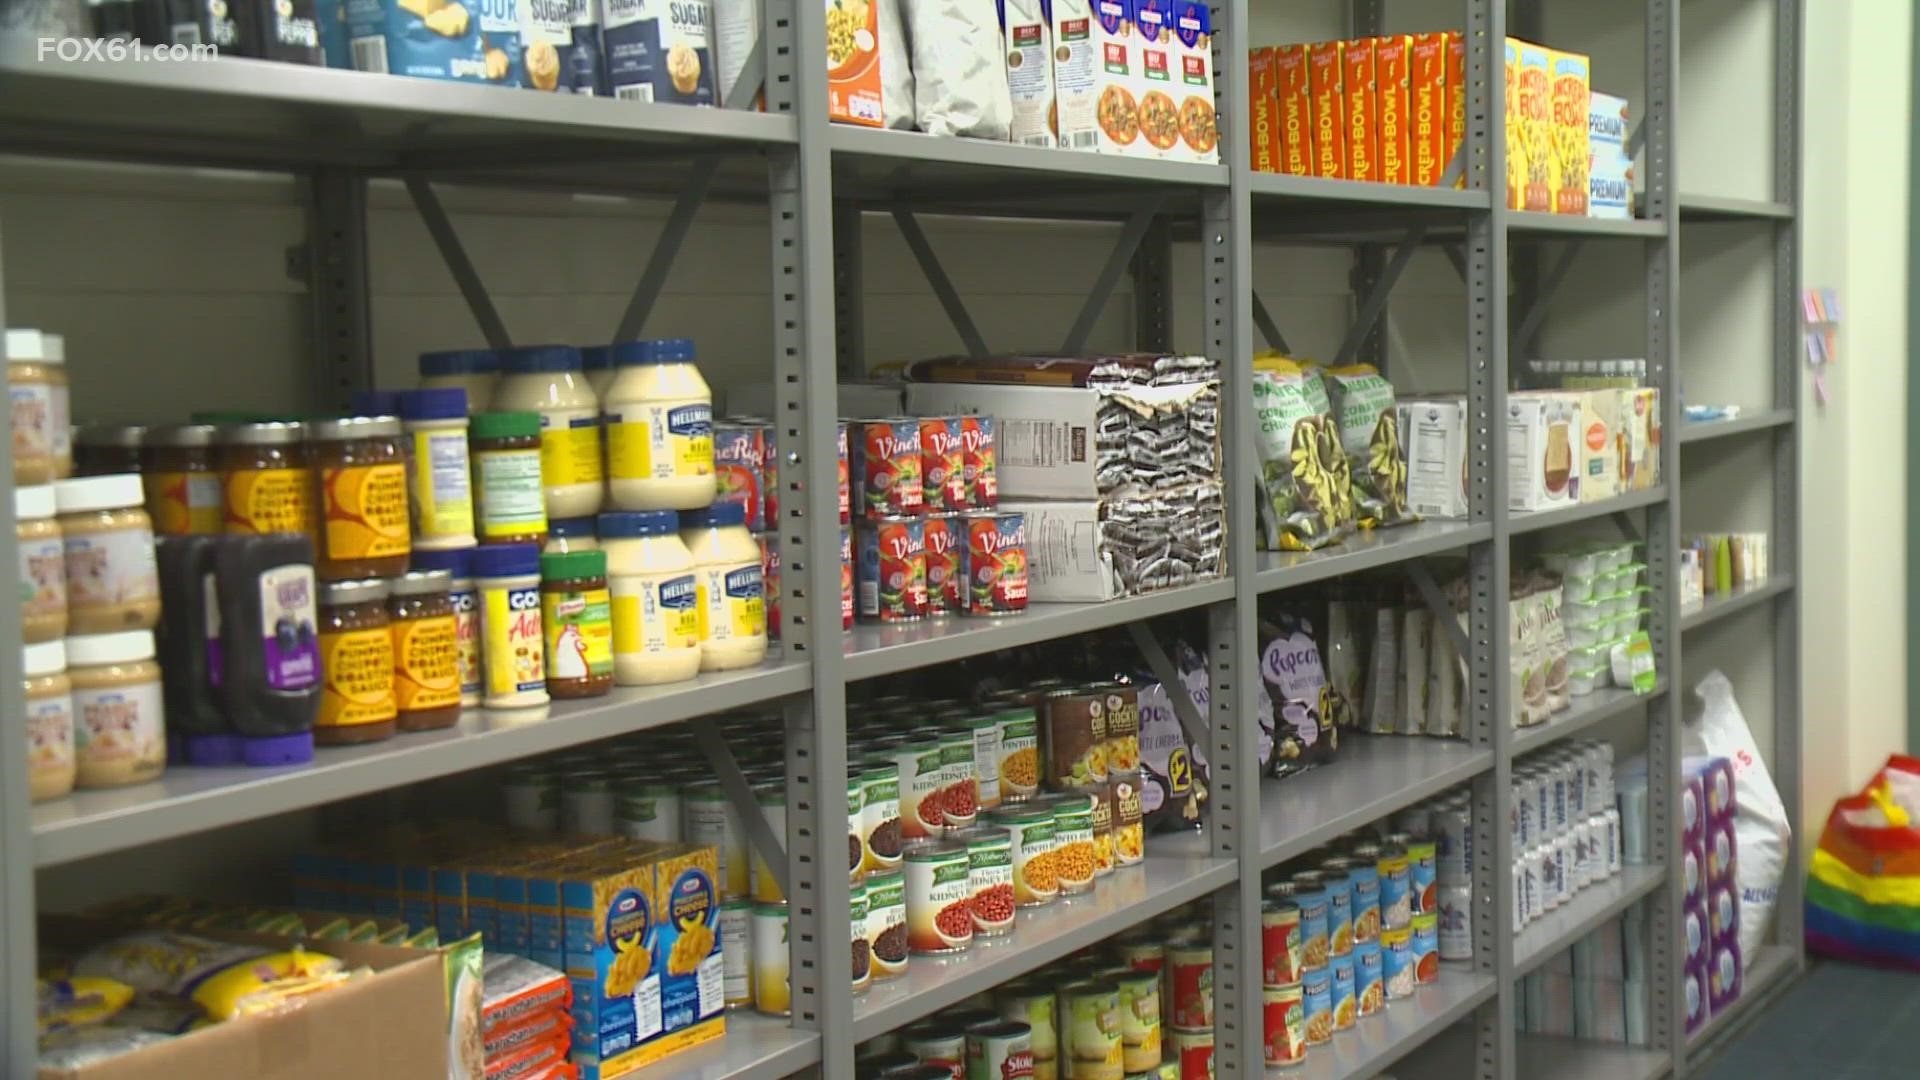 The pantry opened in January as a way to help students experiencing food insecurity. Turns out, at least 55% of all UConn students, are experiencing it.